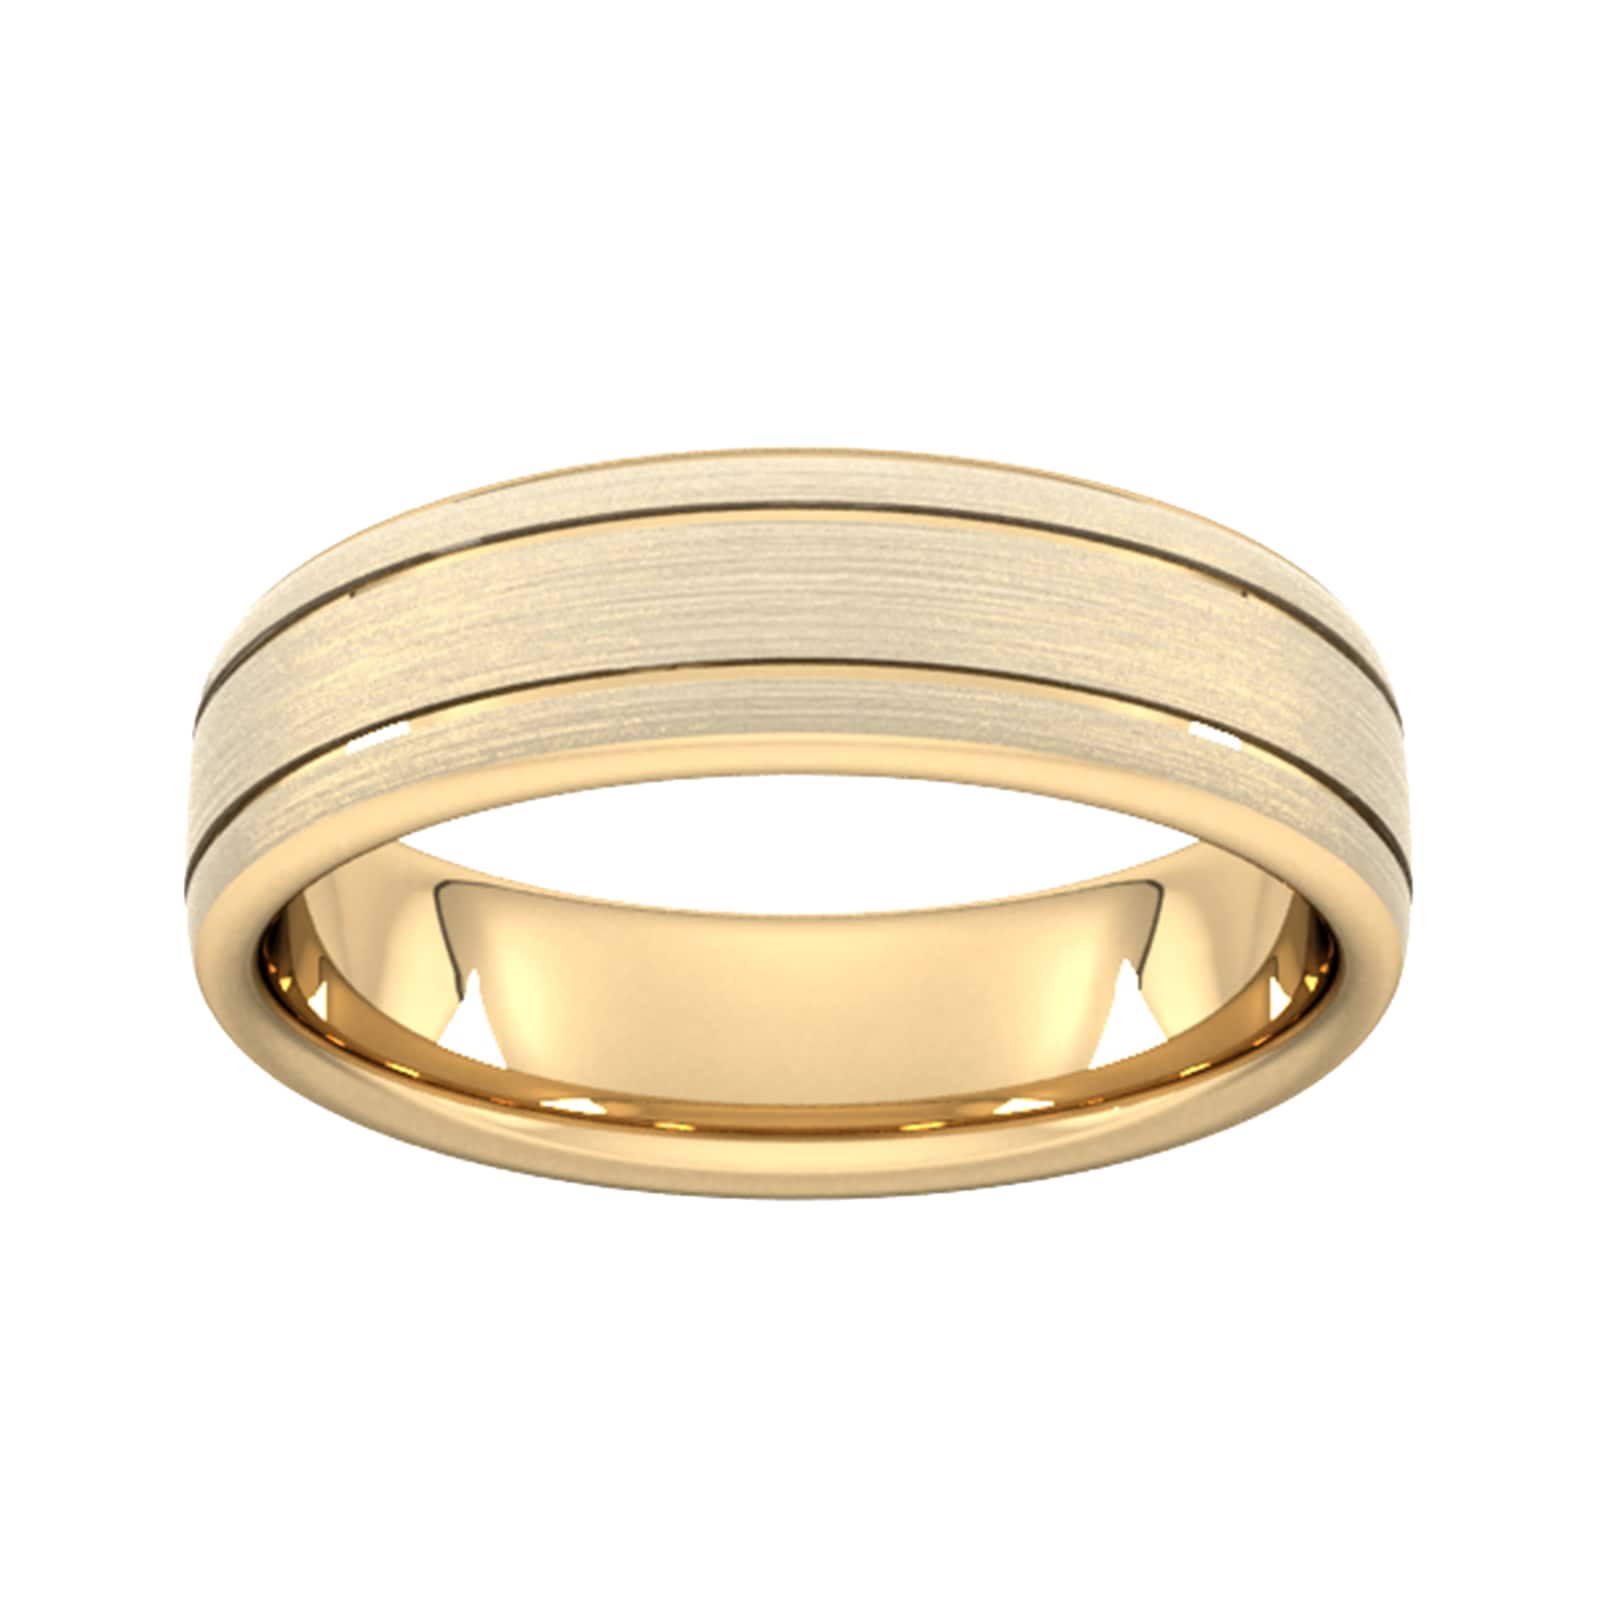 6mm Slight Court Extra Heavy Matt Finish With Double Grooves Wedding Ring In 18 Carat Yellow Gold - Ring Size G